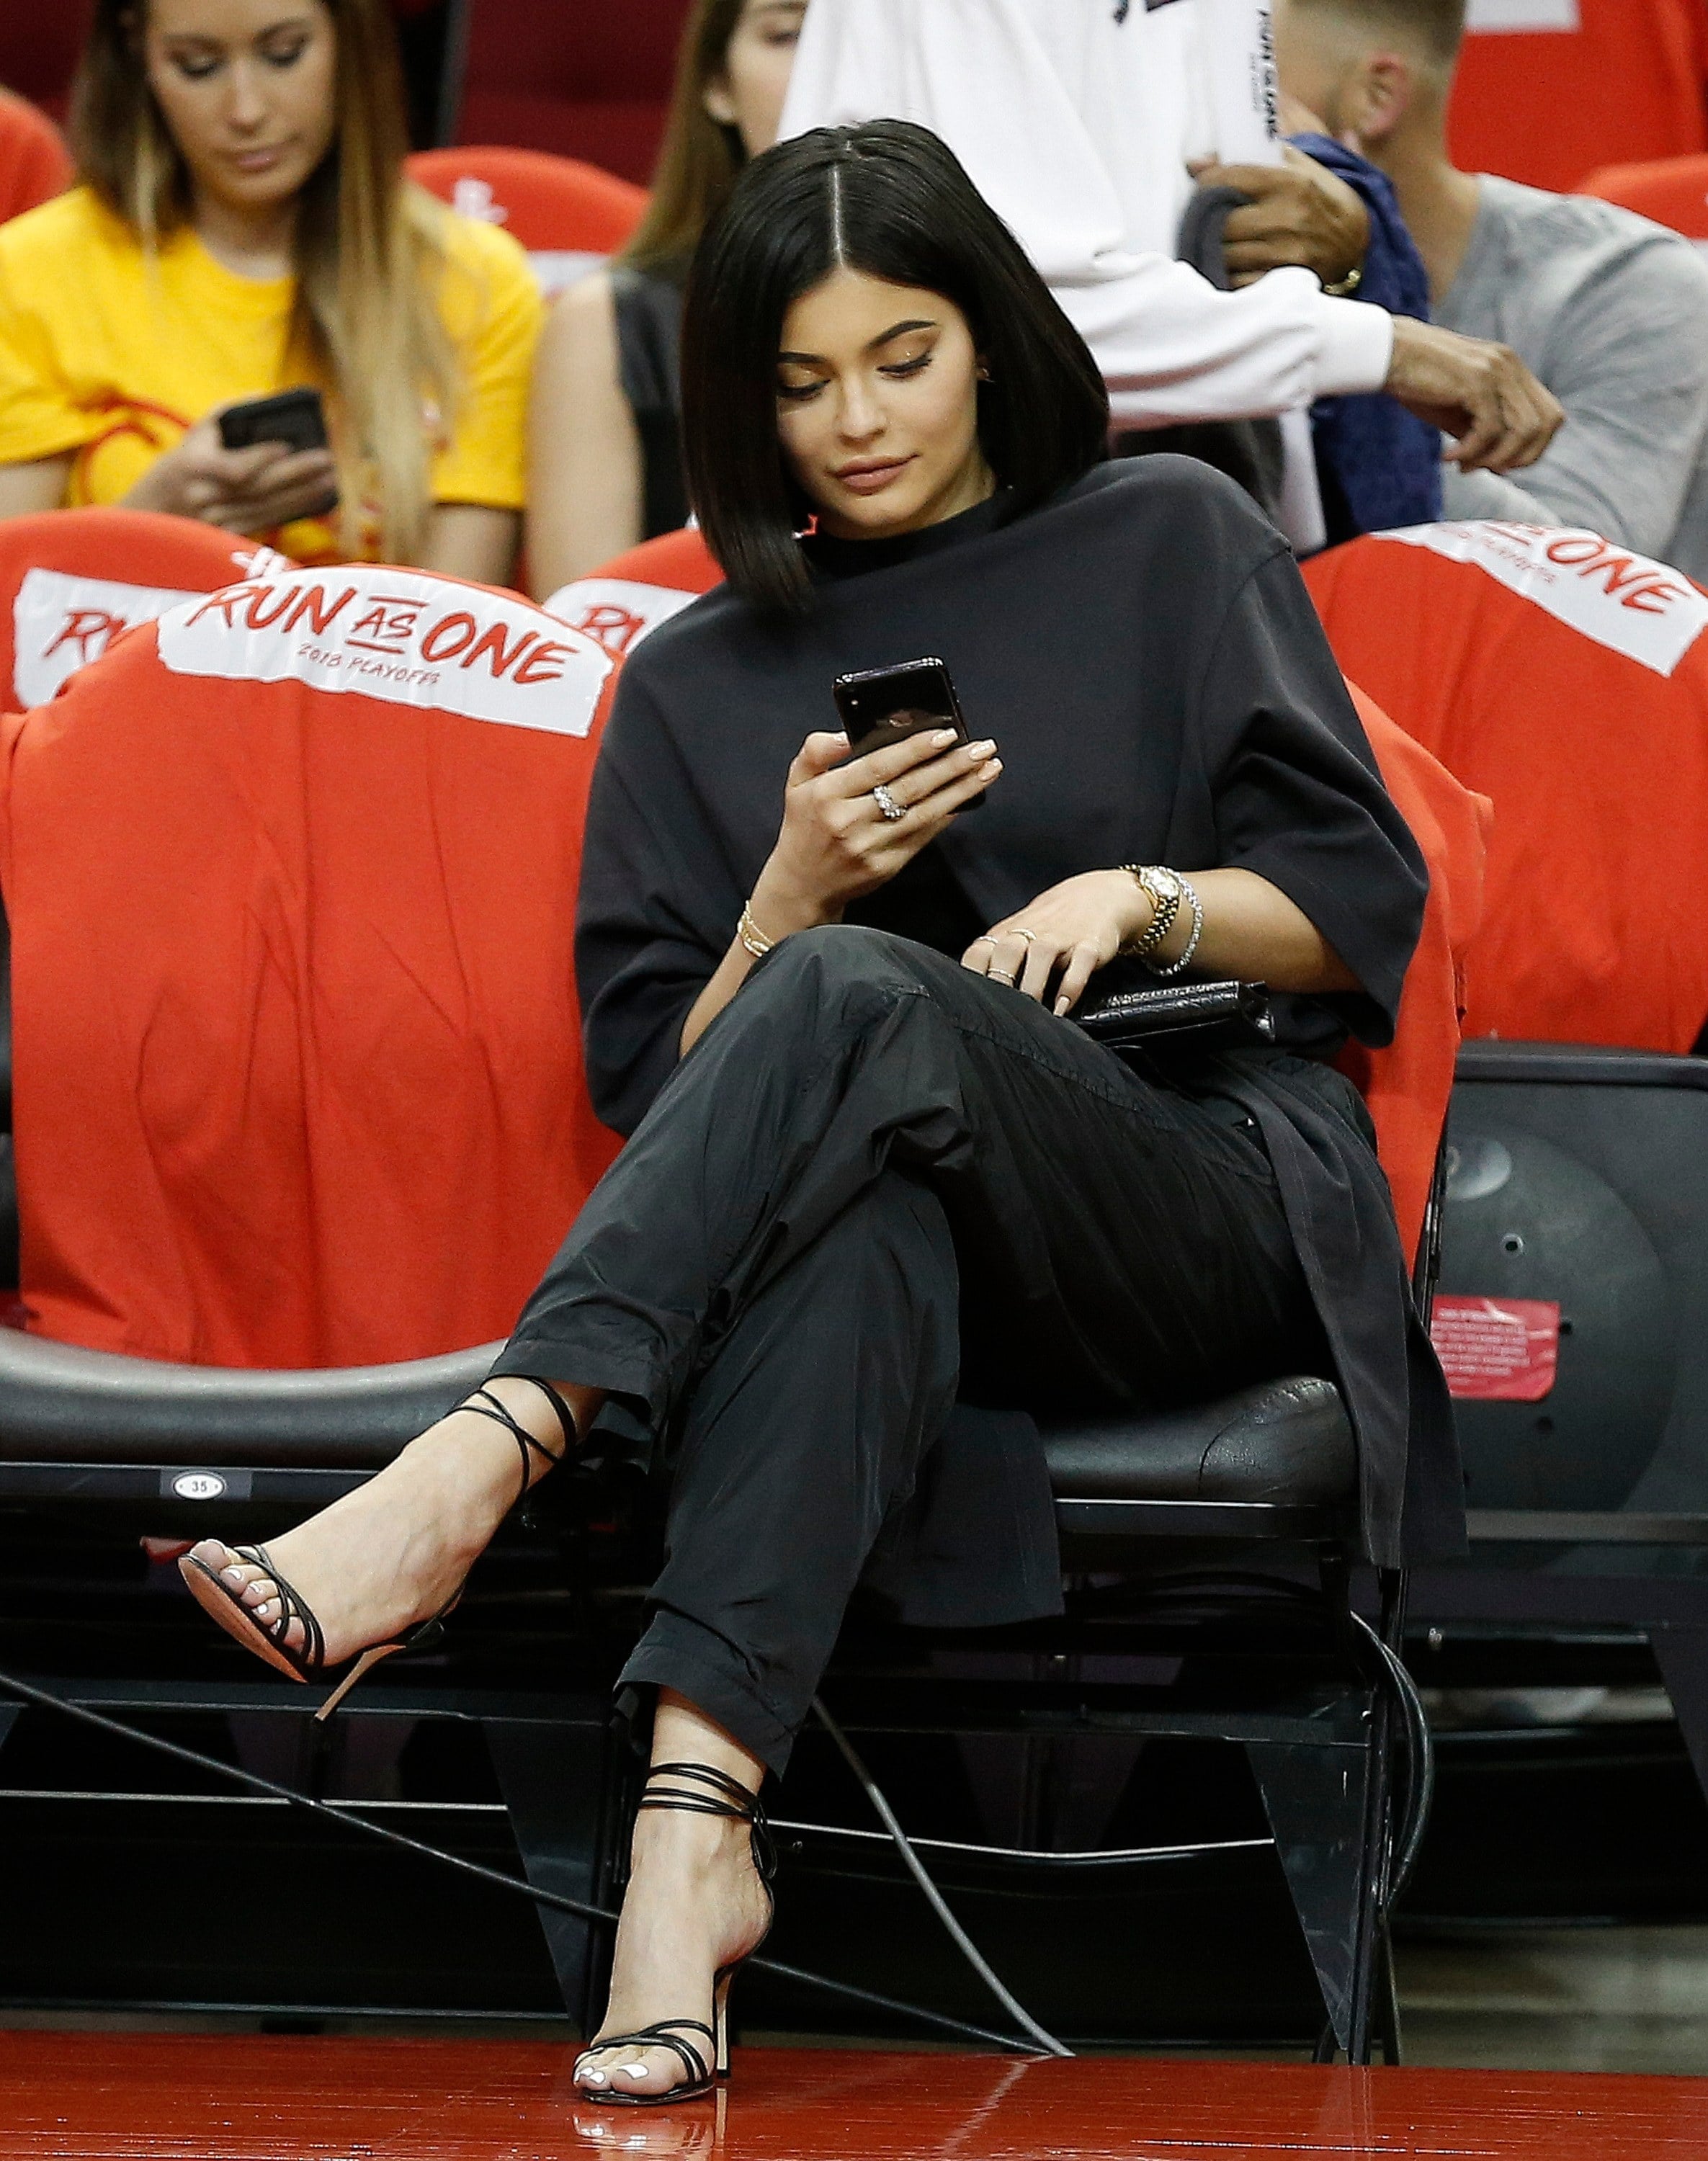 Make like Kylie Jenner and dial up the ankle detail this summer